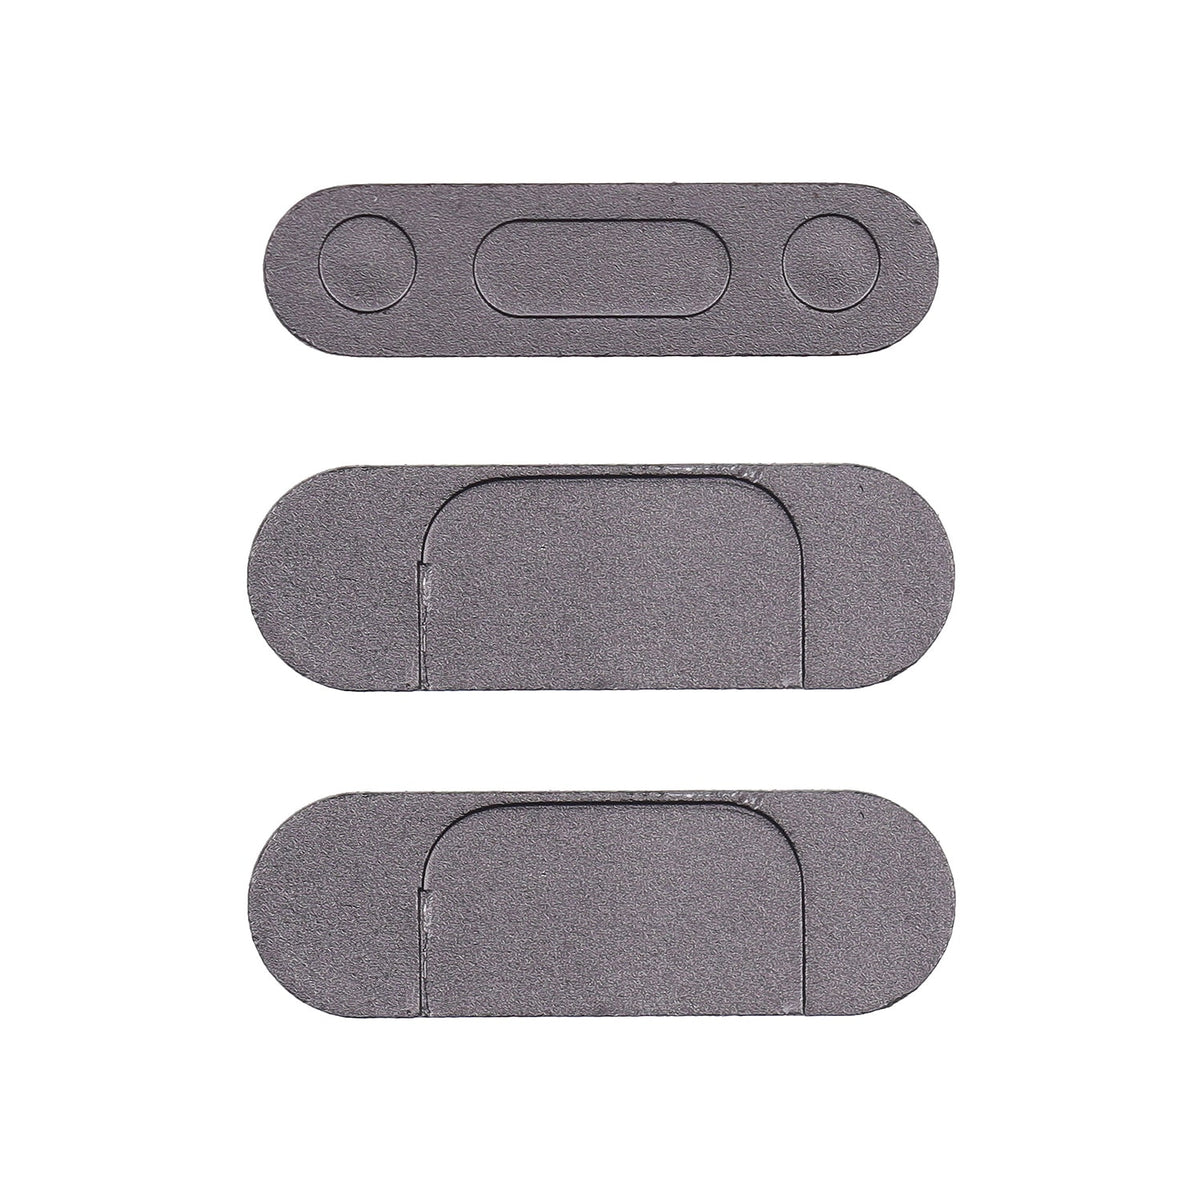 GREY SIDE BUTTONS SET  FOR IPAD 7TH